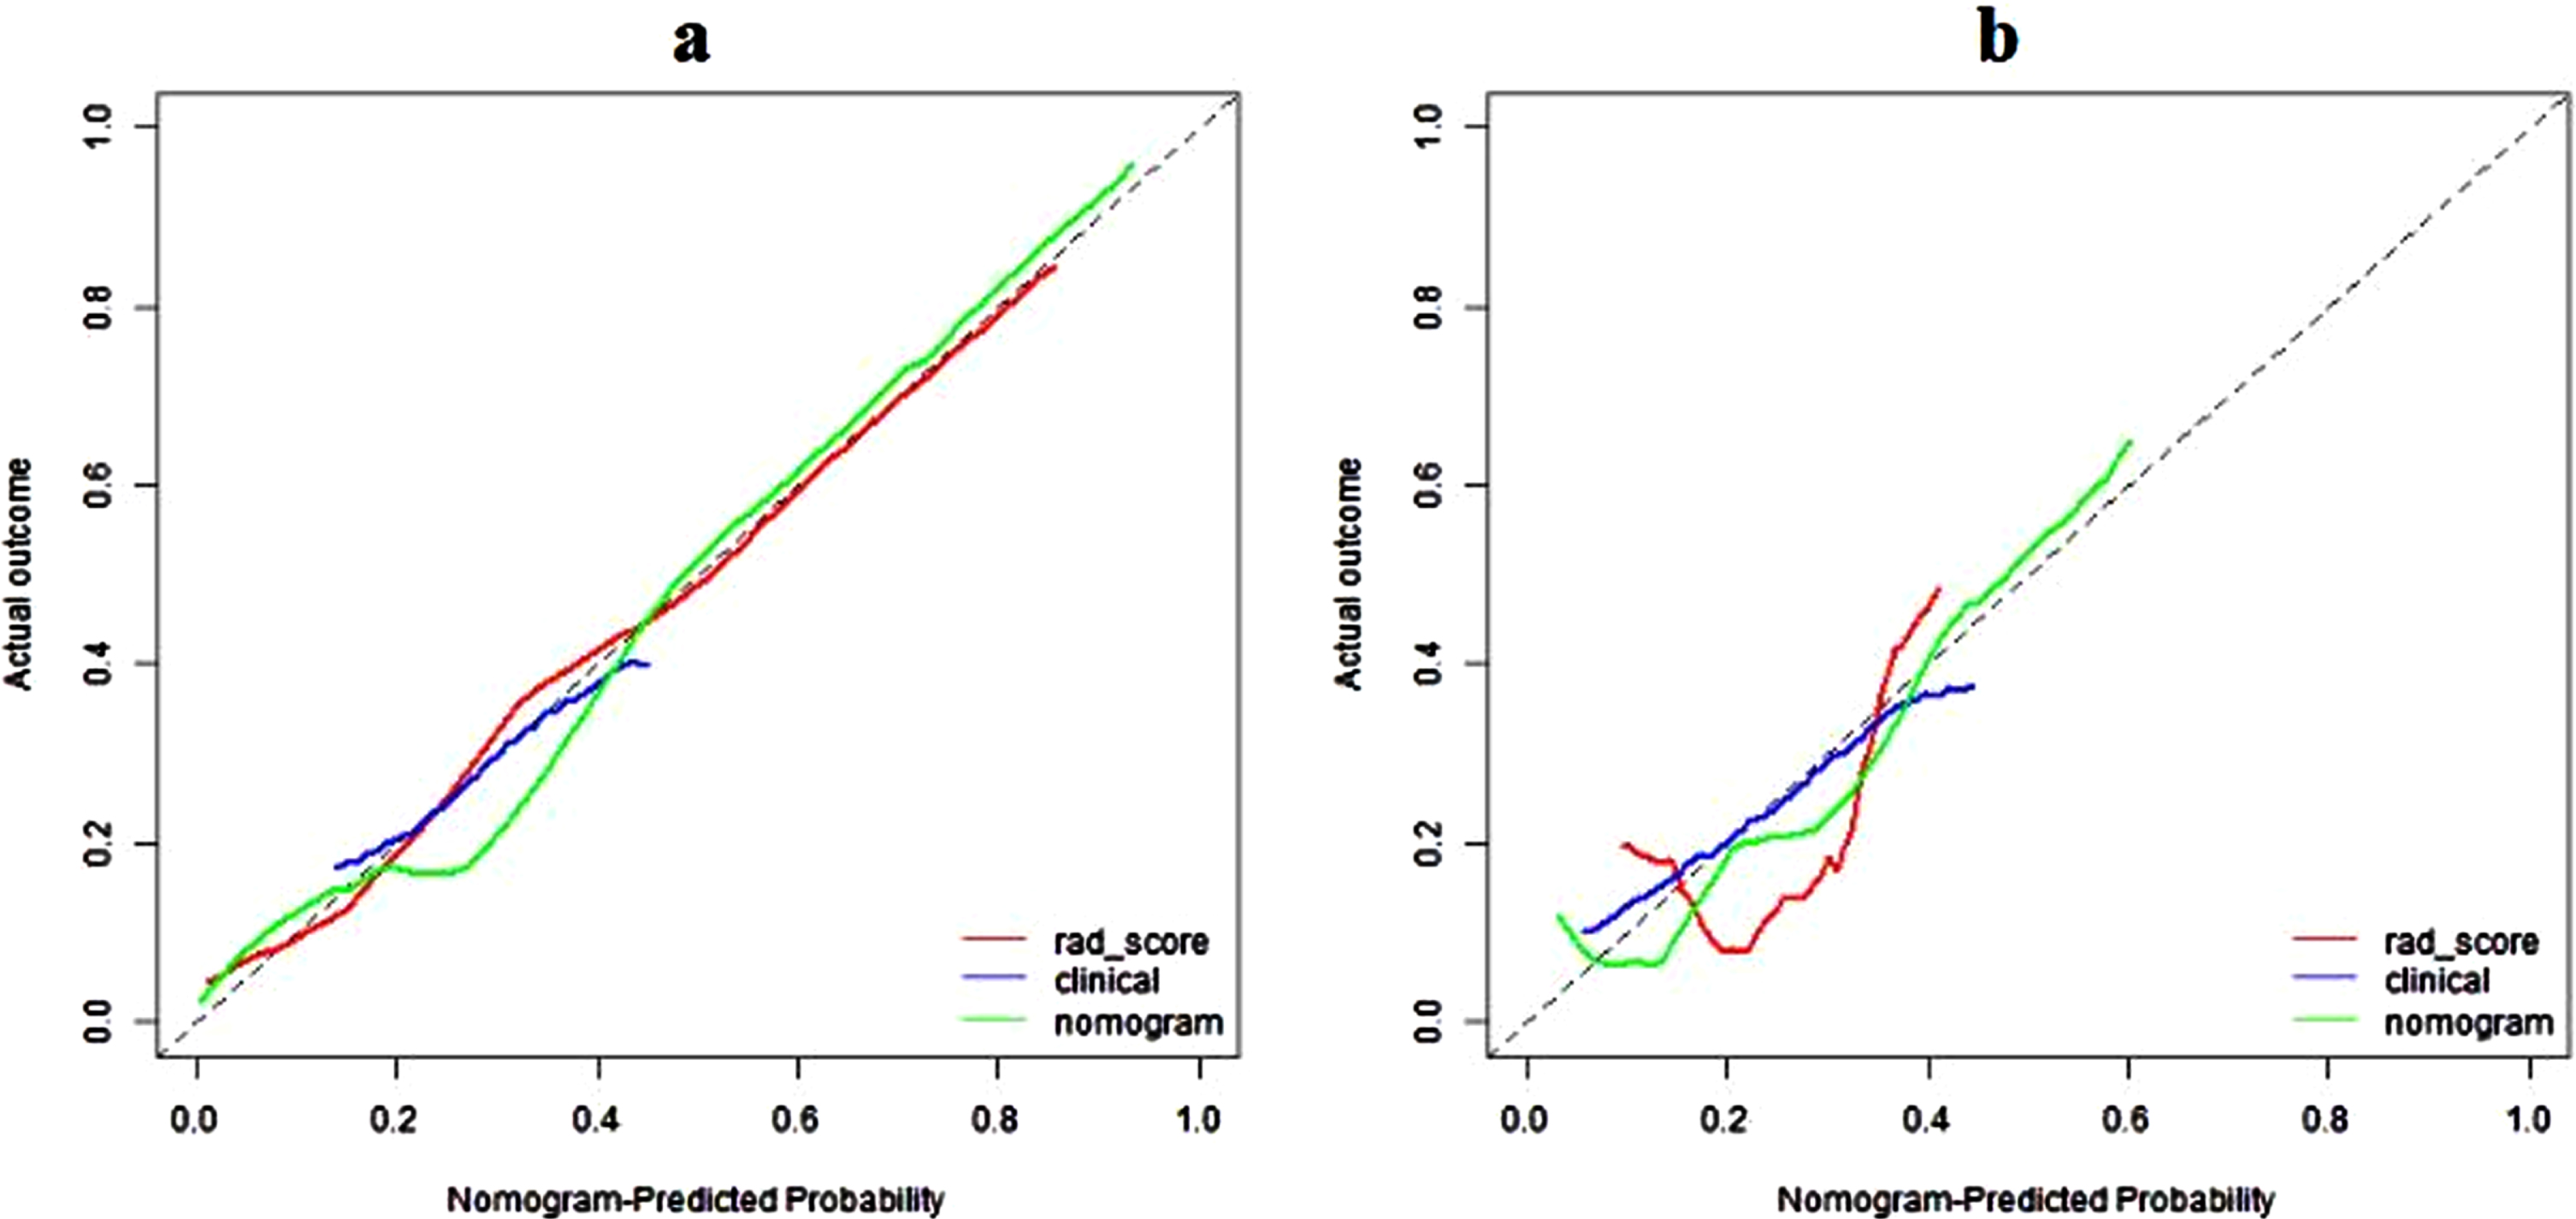 Calibration curves of radiomics nomogram in the training (a) and validation (b) sets. The diagonal line represents the perfect prediction of the radiomics nomogram. The red, blue and green lines represent the calibration curve of rad-score, clinical model, and radiomics nomogram, respectively. The calibration curves of radiomics nomogram are close to the diagonal line both in the training and validation sets, which shows that the prediction probability have good agreement with the actual probability.